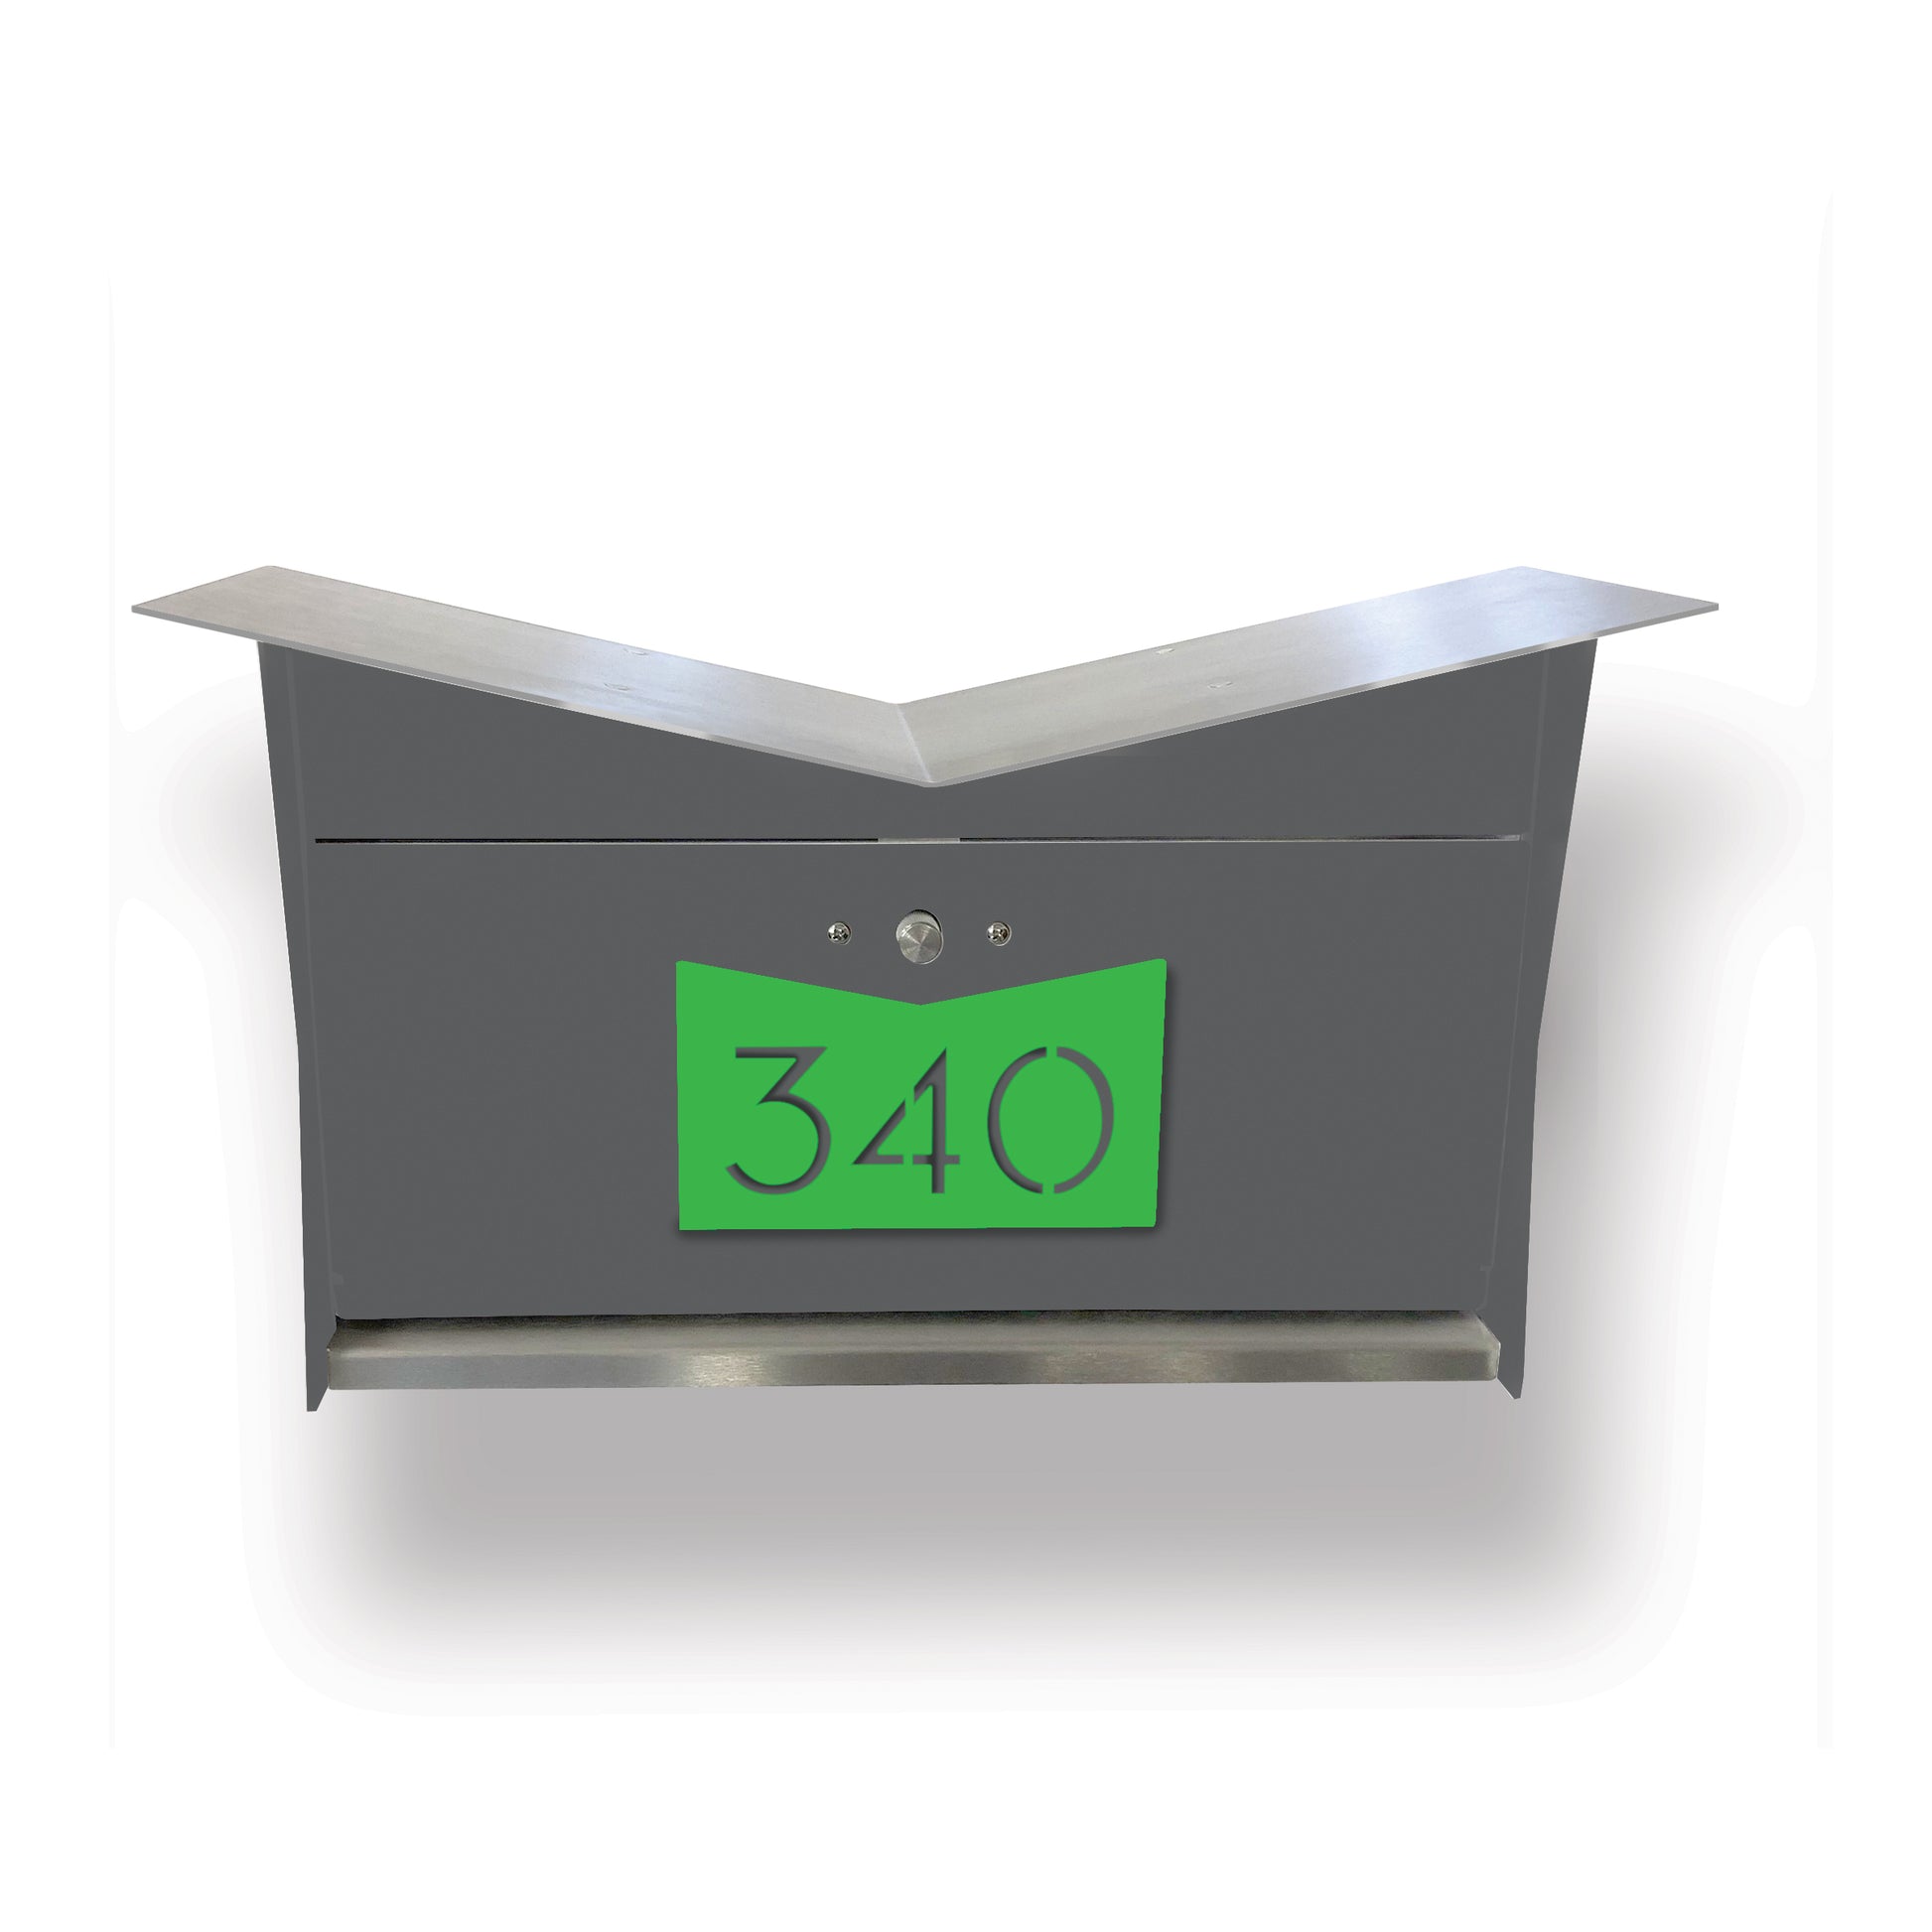 Wall Mount Mailbox | ButterFly Box in designer gray and lime green